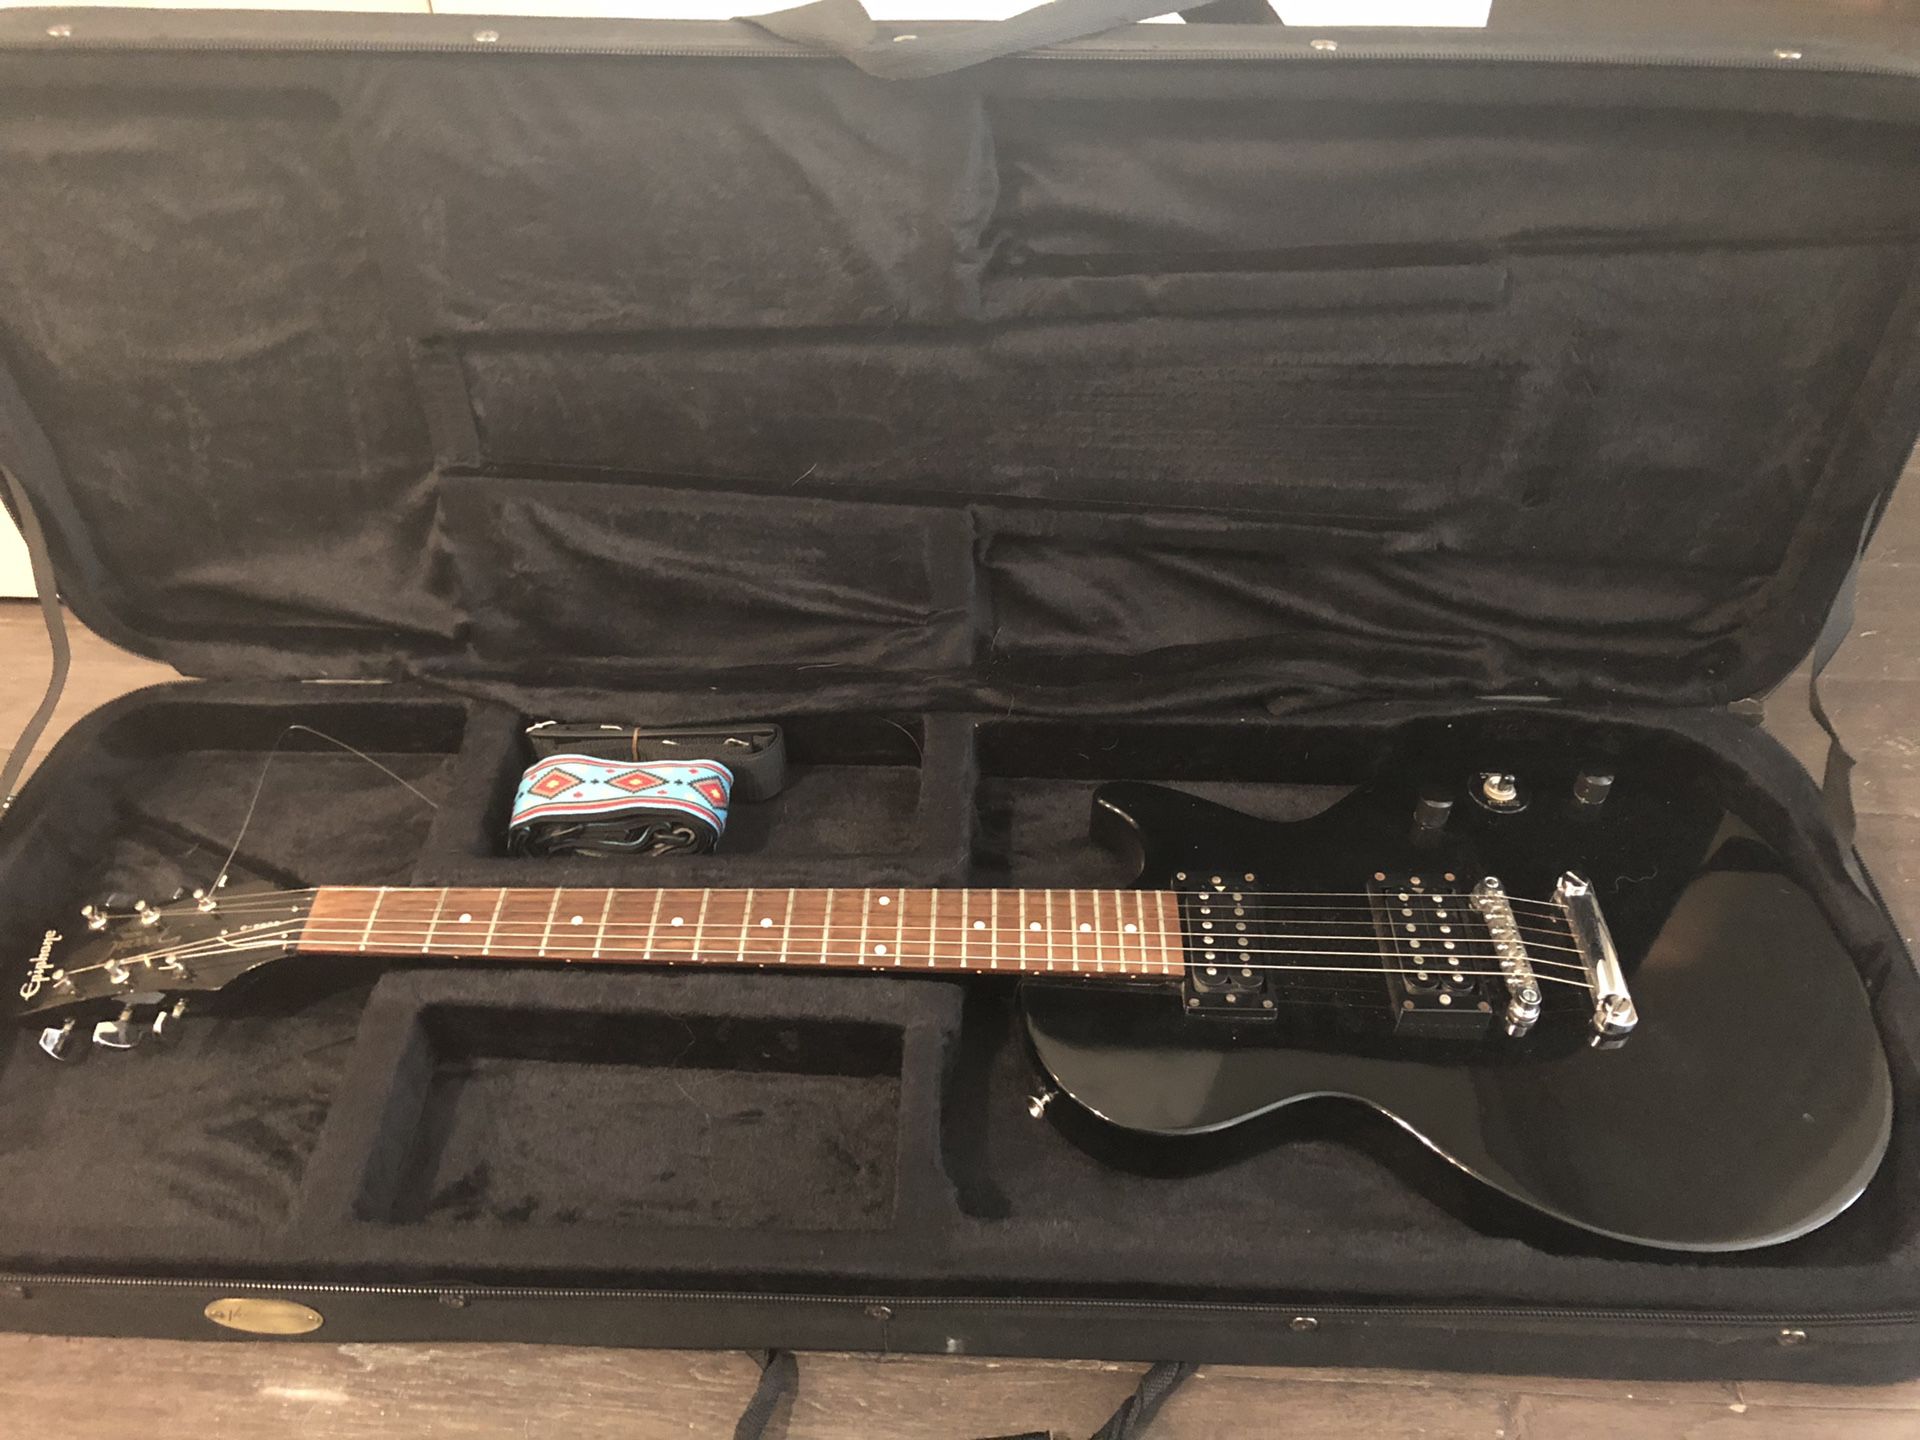 Epiphone Special II electric guitar